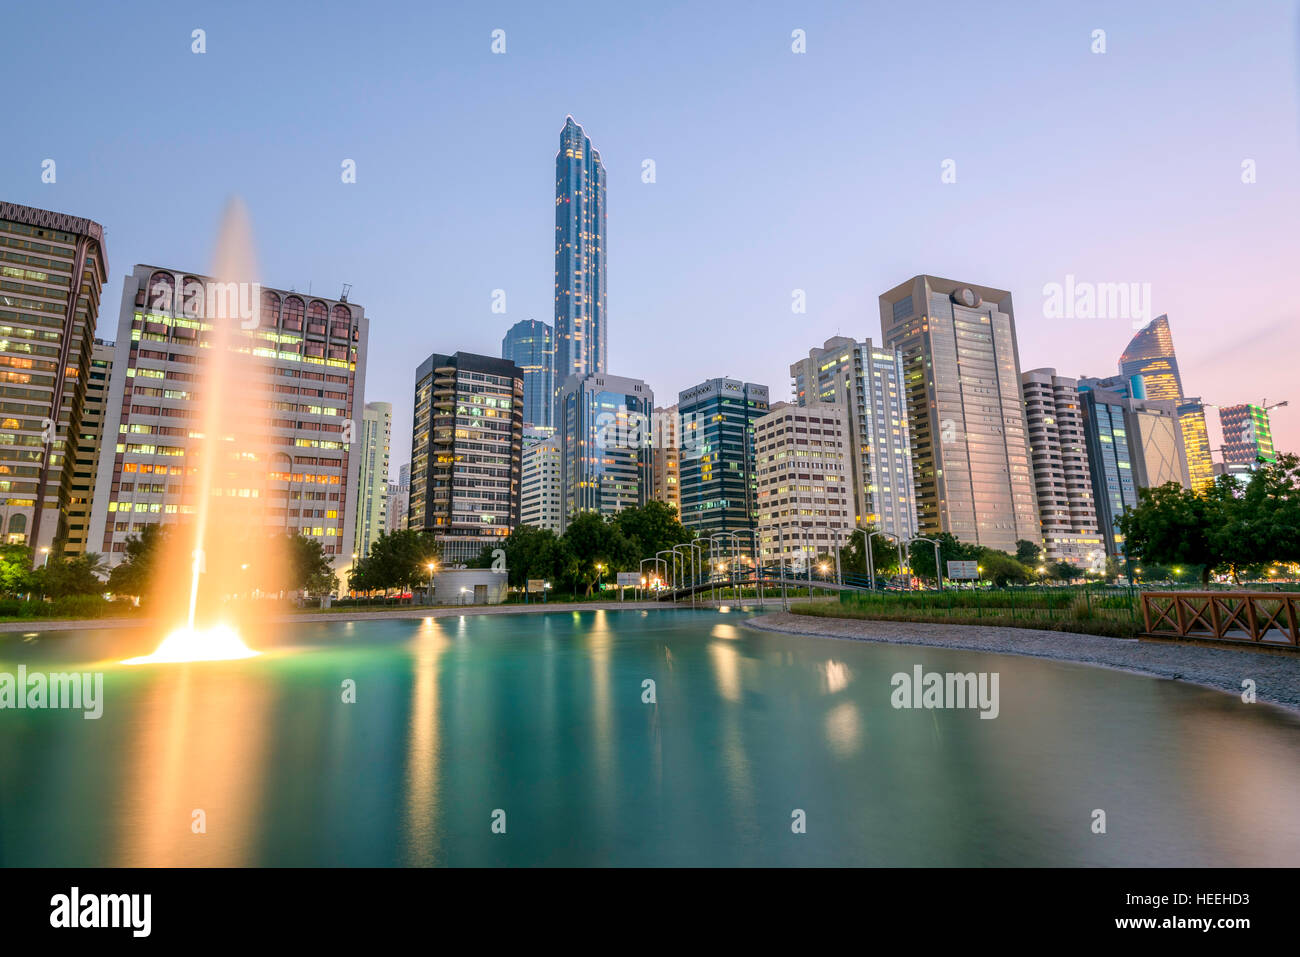 Reflection of buildings on Abu Dhabi Corniche captured at sunset Stock Photo